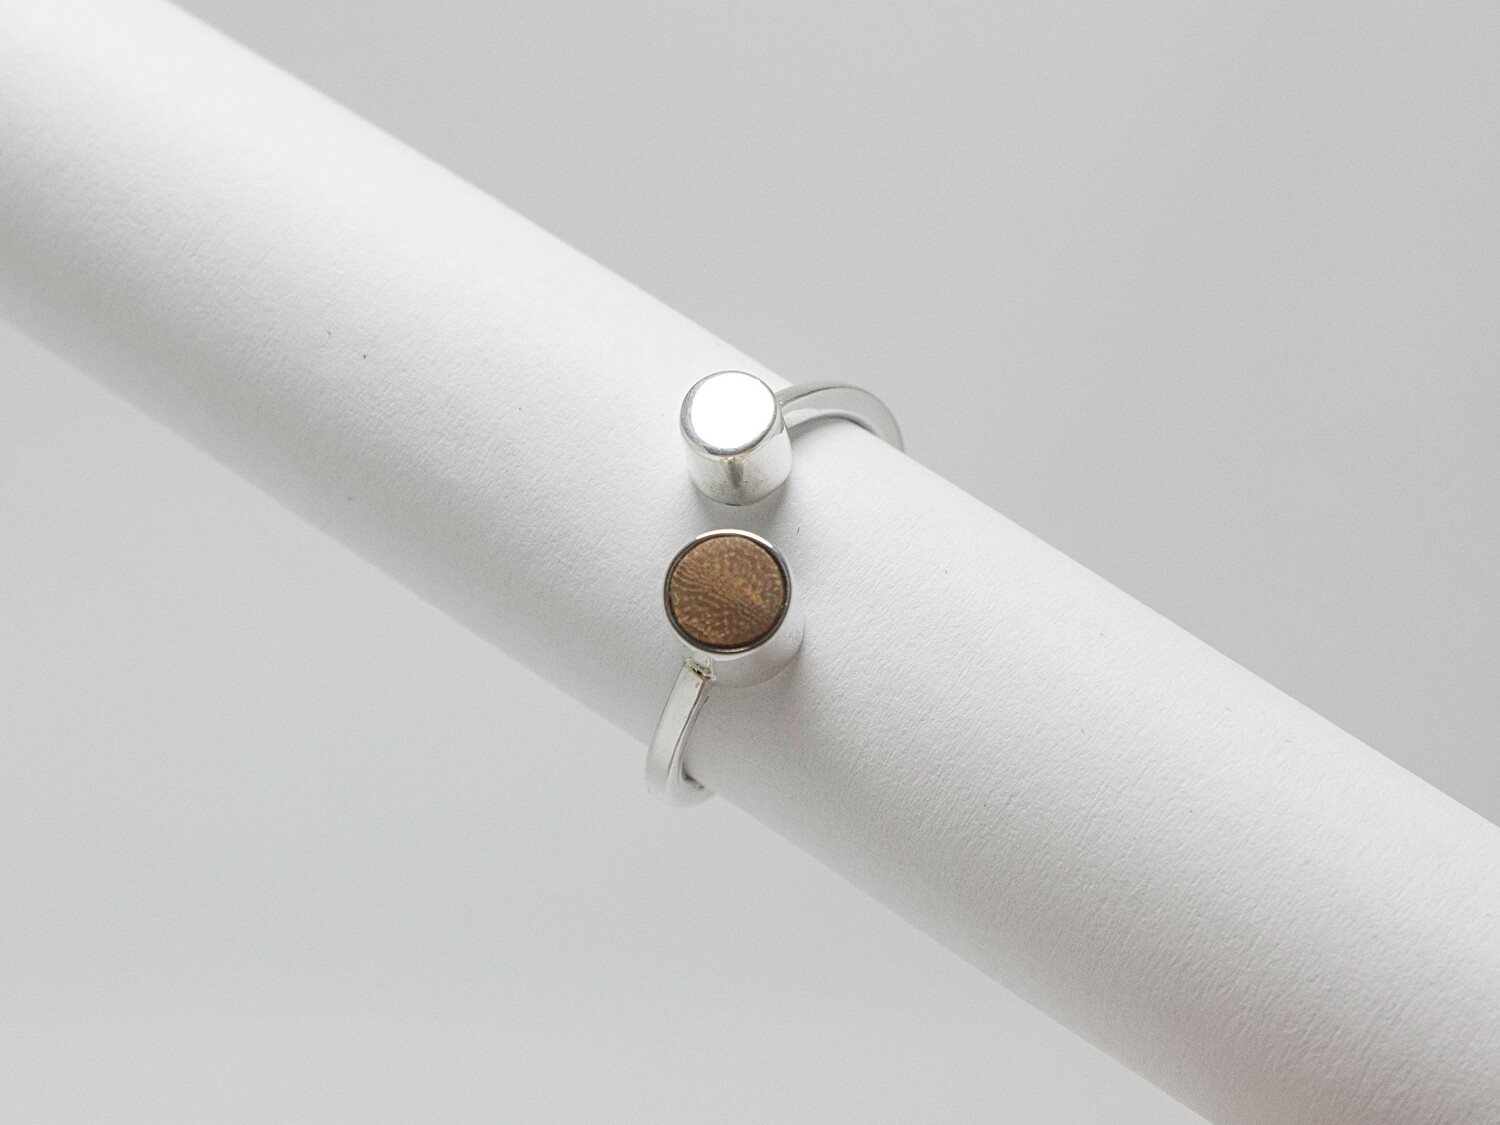 Geometric statement ring. Handmade modern silver and wood ring.